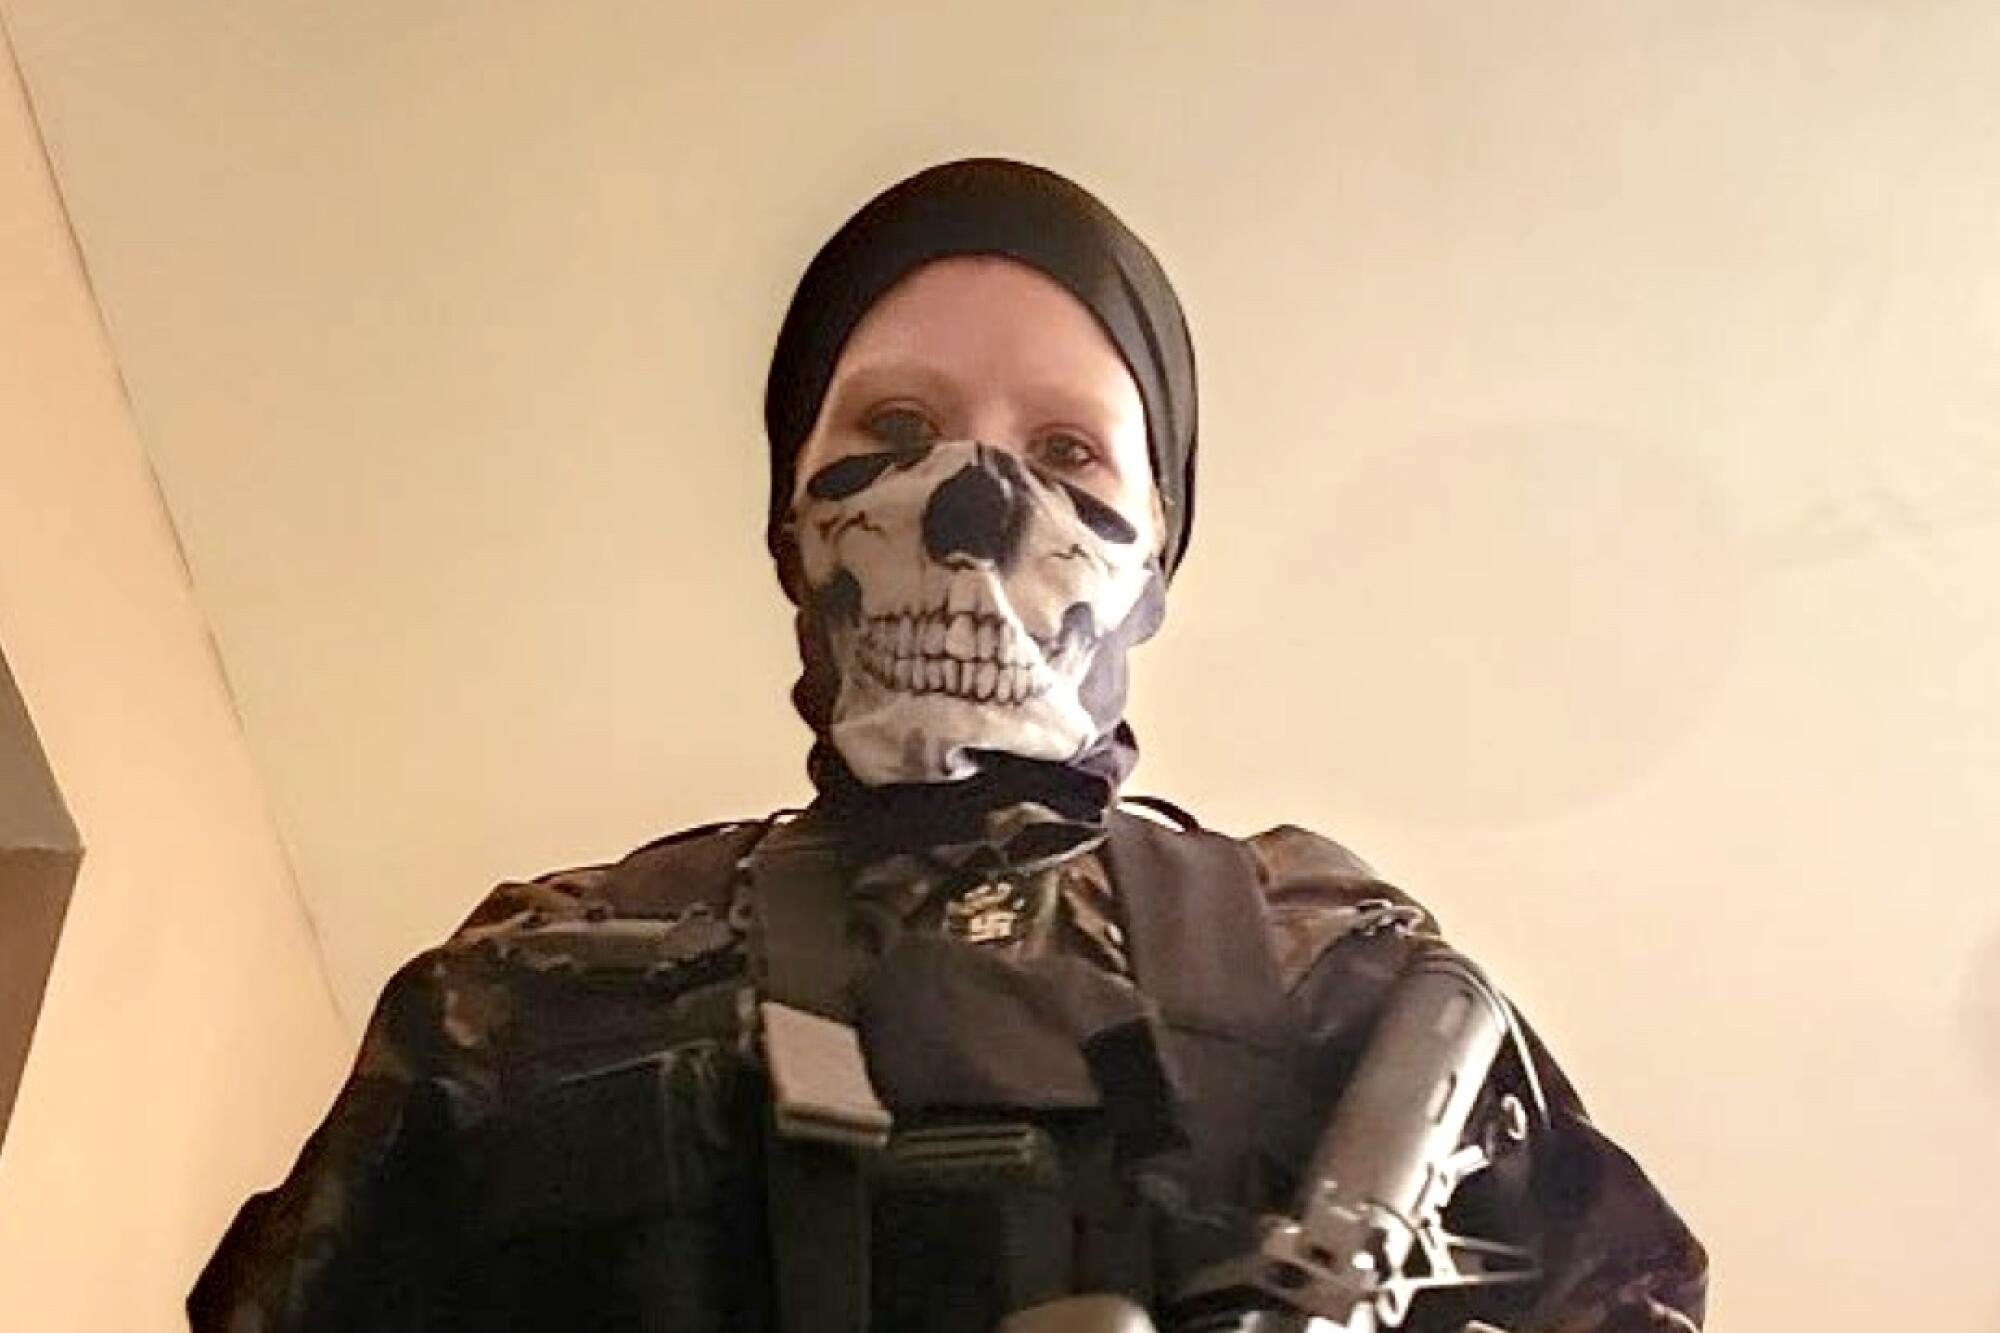 A woman with a skull bandanna around her face wears tactical gear while holding a rifle